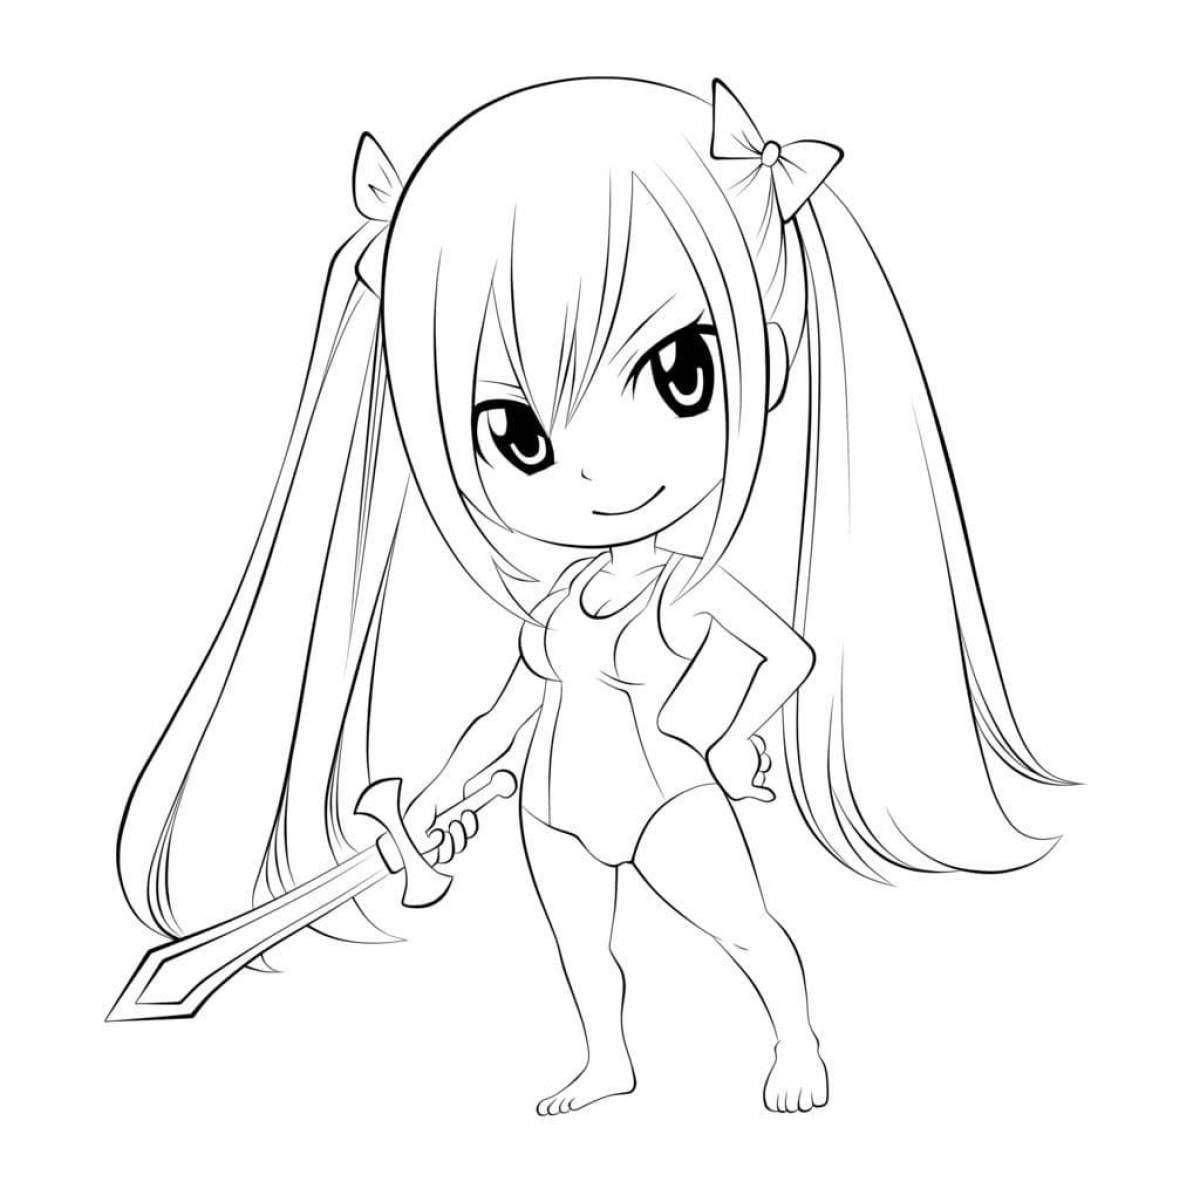 Colorful chibi coloring page